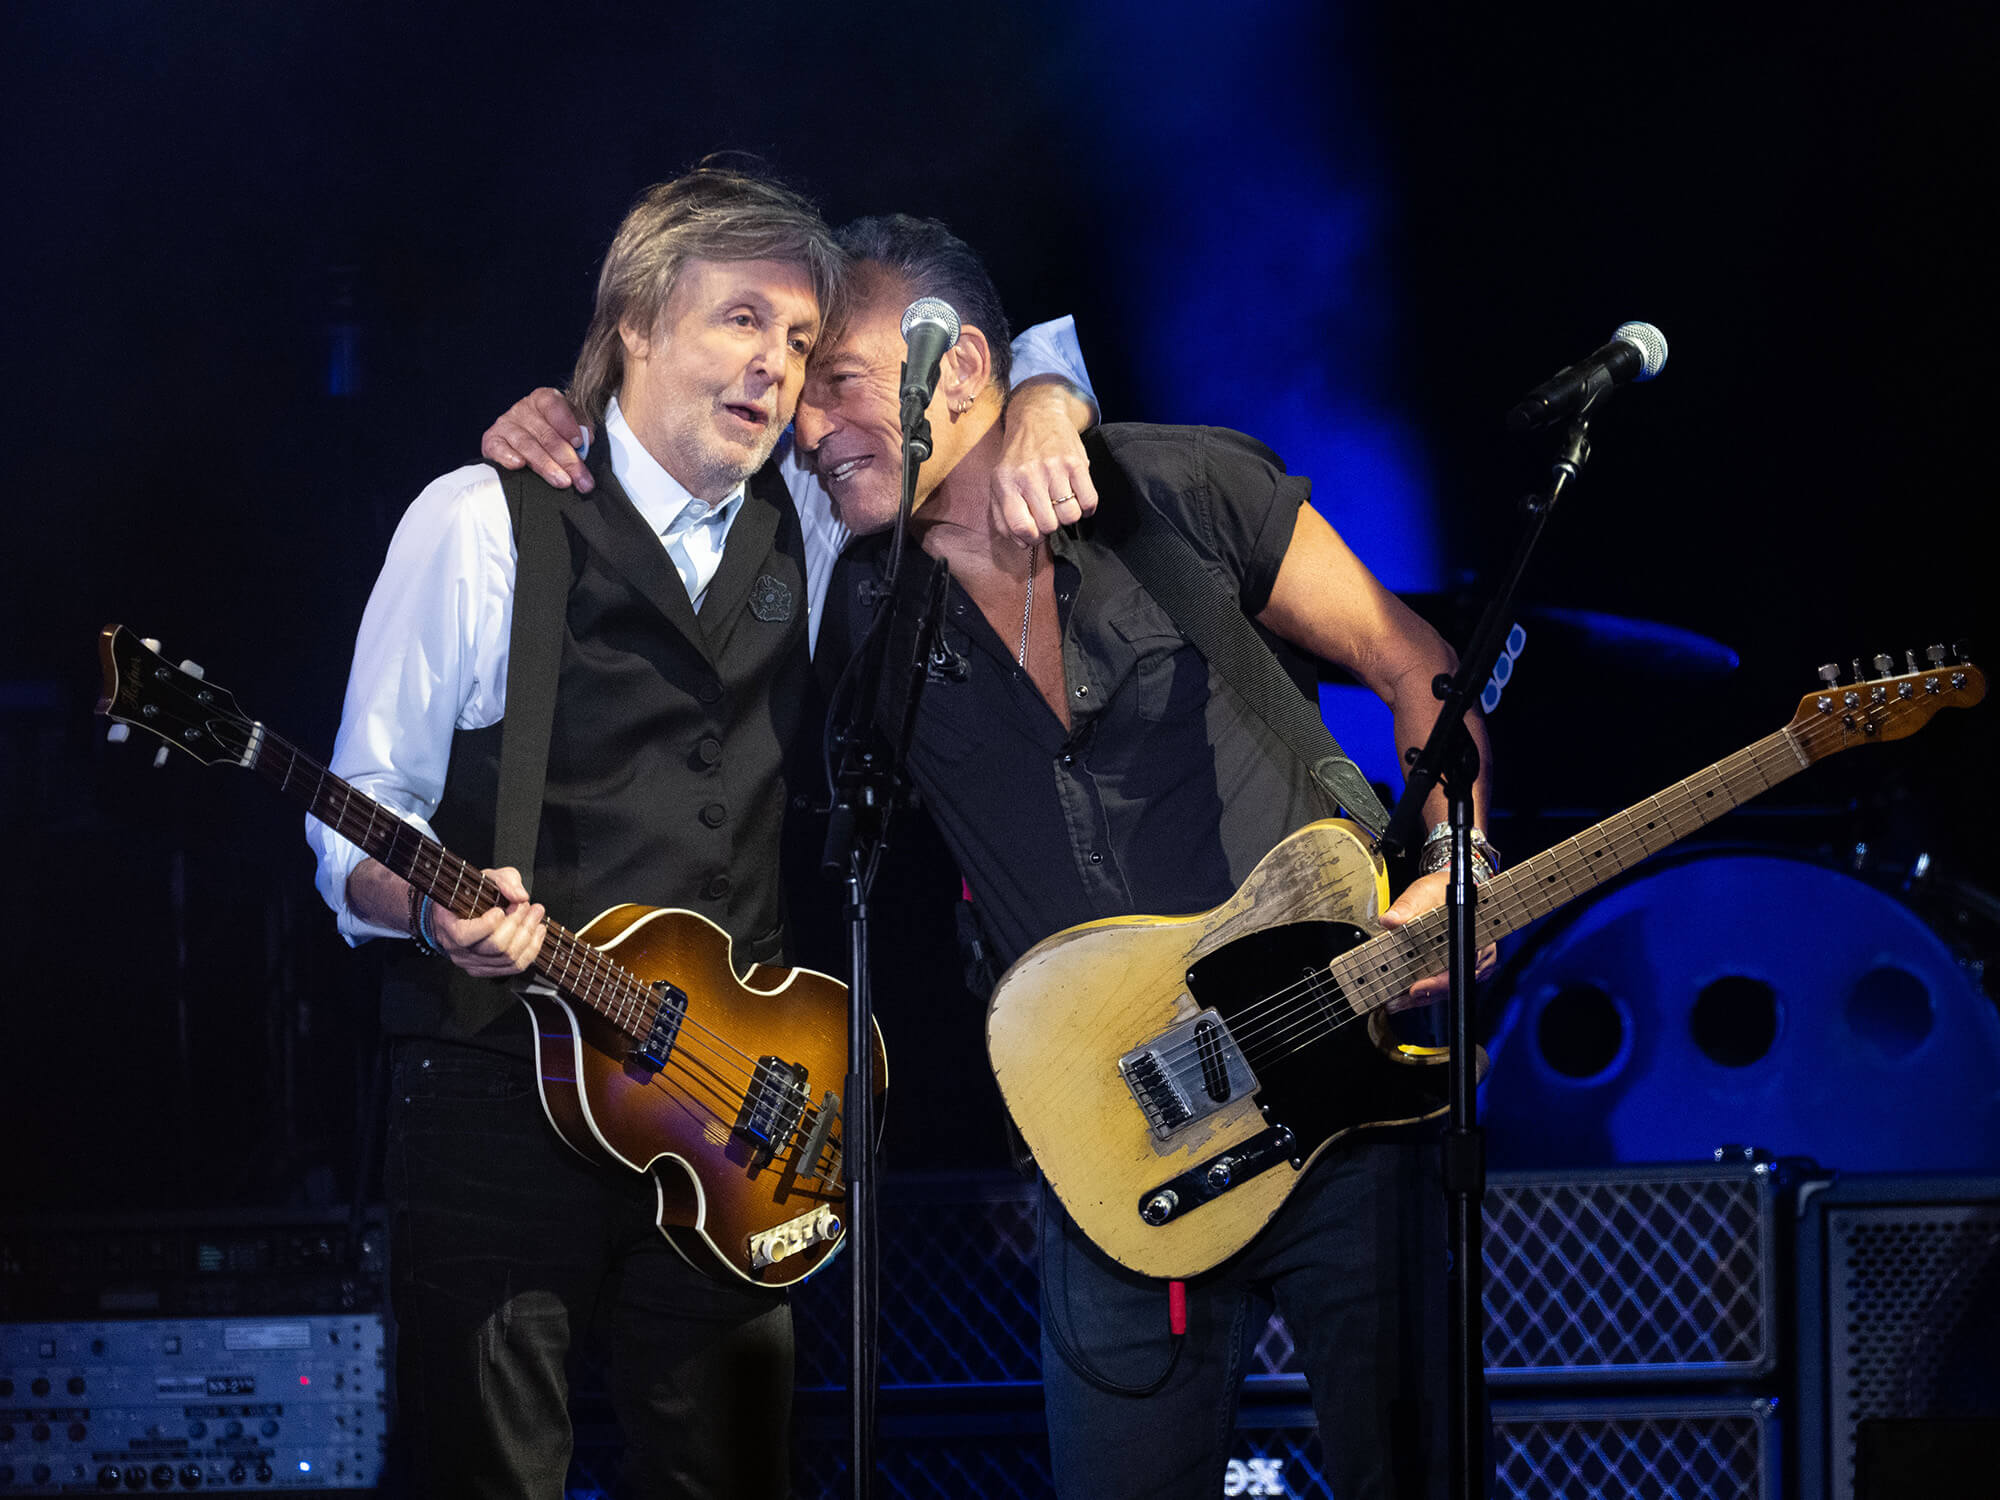 Paul McCartney and Bruce Springsteen on stage at Glastonbury in 2022. The pair each have one arm around the other and are holding their guitars in one hand.